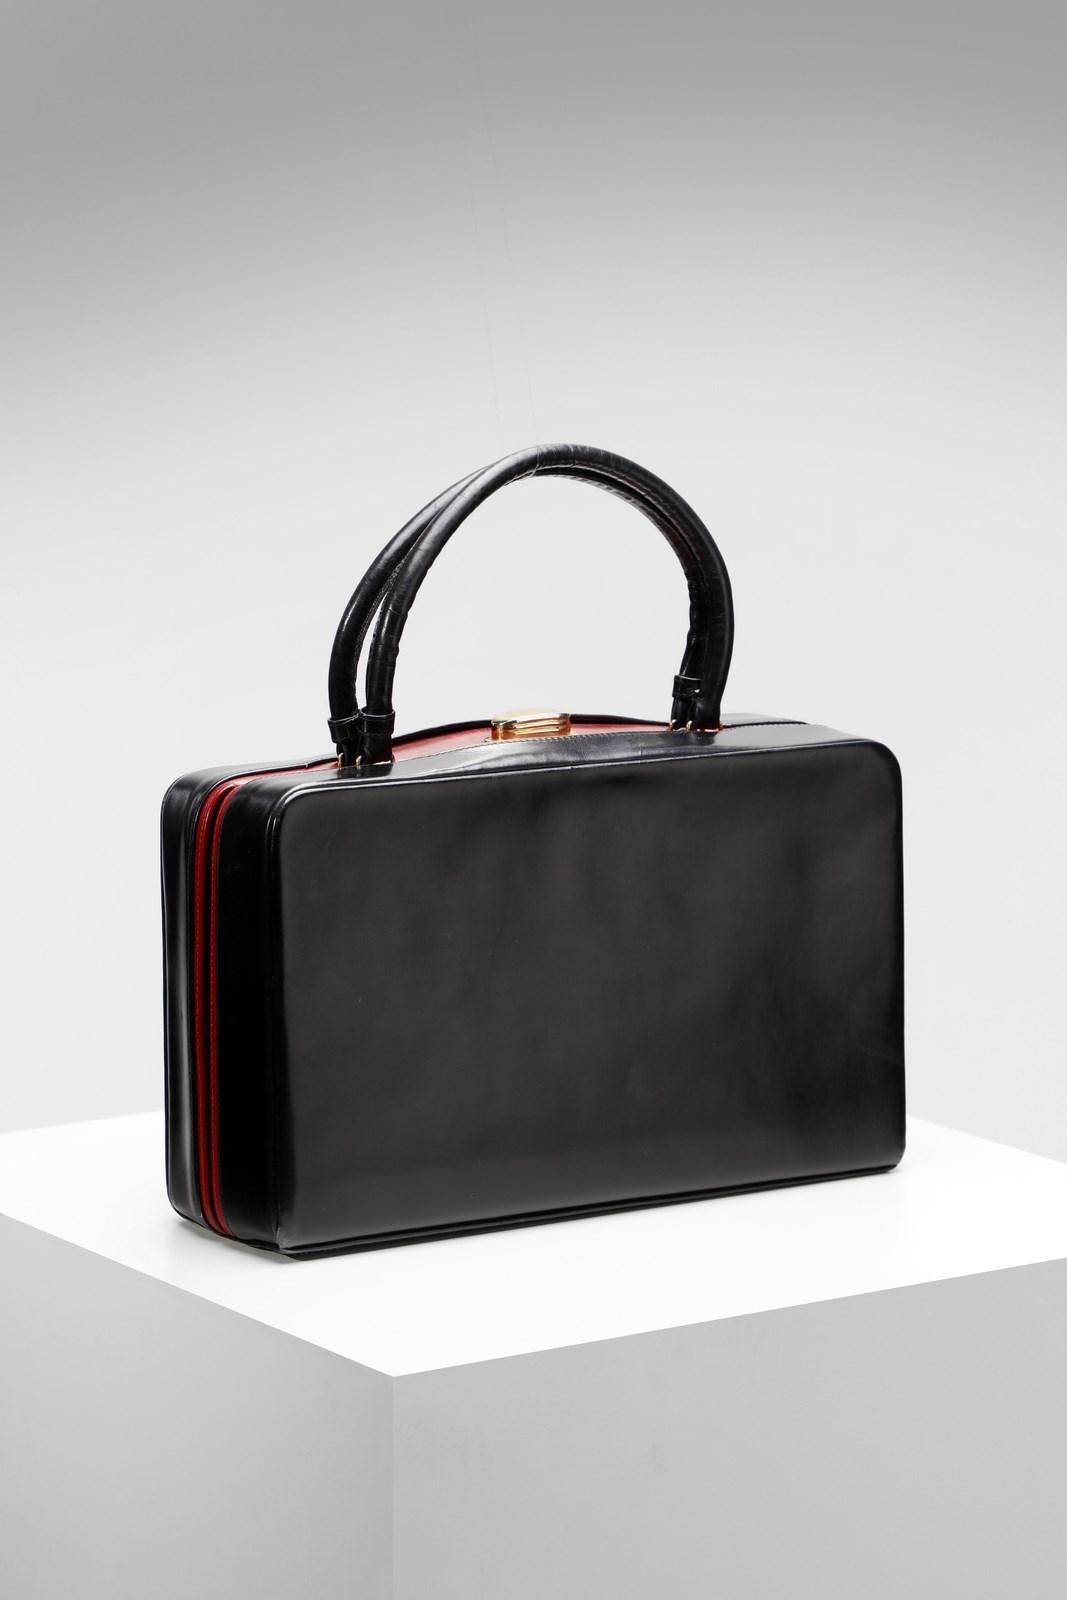 Elegant fine handbag from the great Italian fashion house Gucci from the 1950s-60s. The model shown is a small, rigid, double-handled handbag bauletto. Made of black leather conn central inserts in fiery red leather. Its closure is in gold metal .